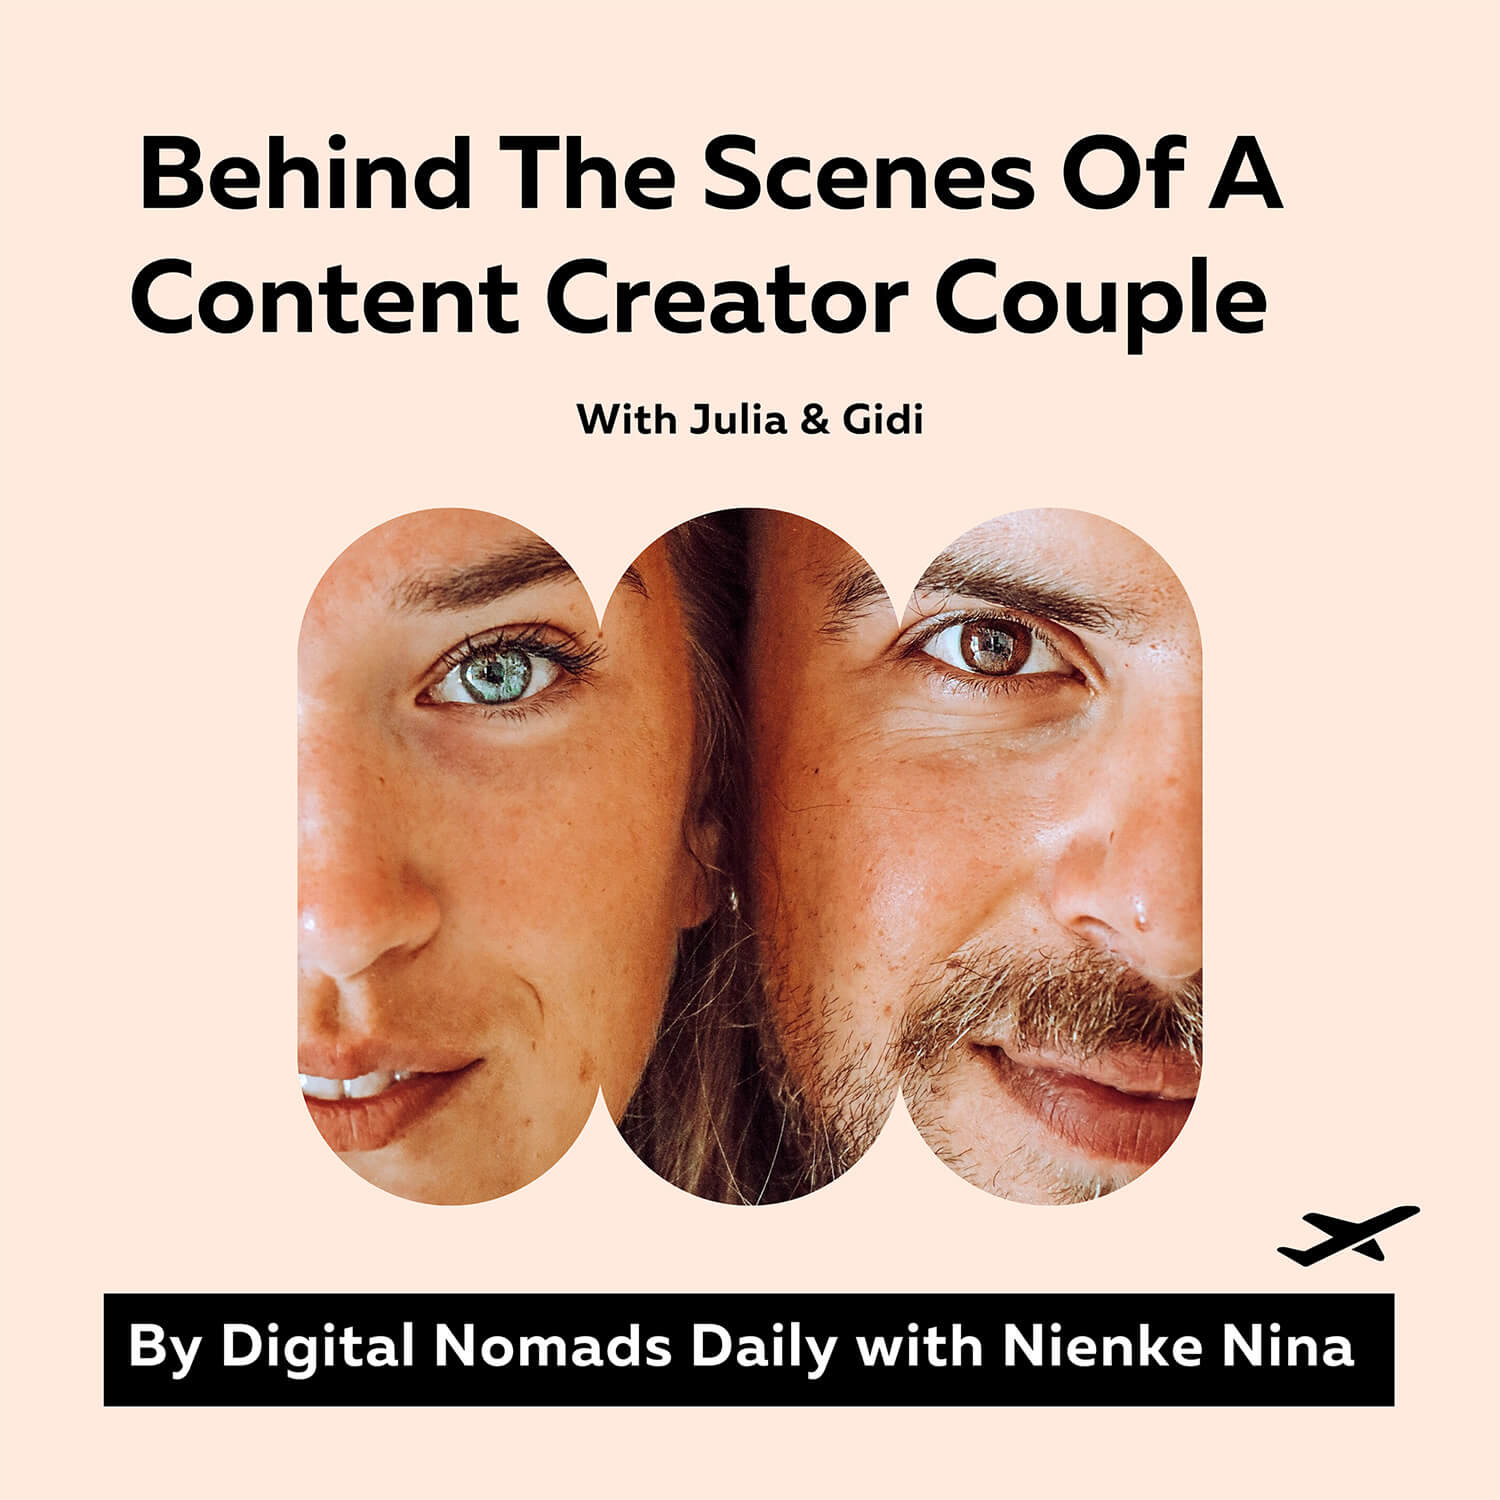 Digital Nomads Daily Podcast Cover of Episode 31 Behind The Scenes Of A Content Creator Couple Julia and Gidi